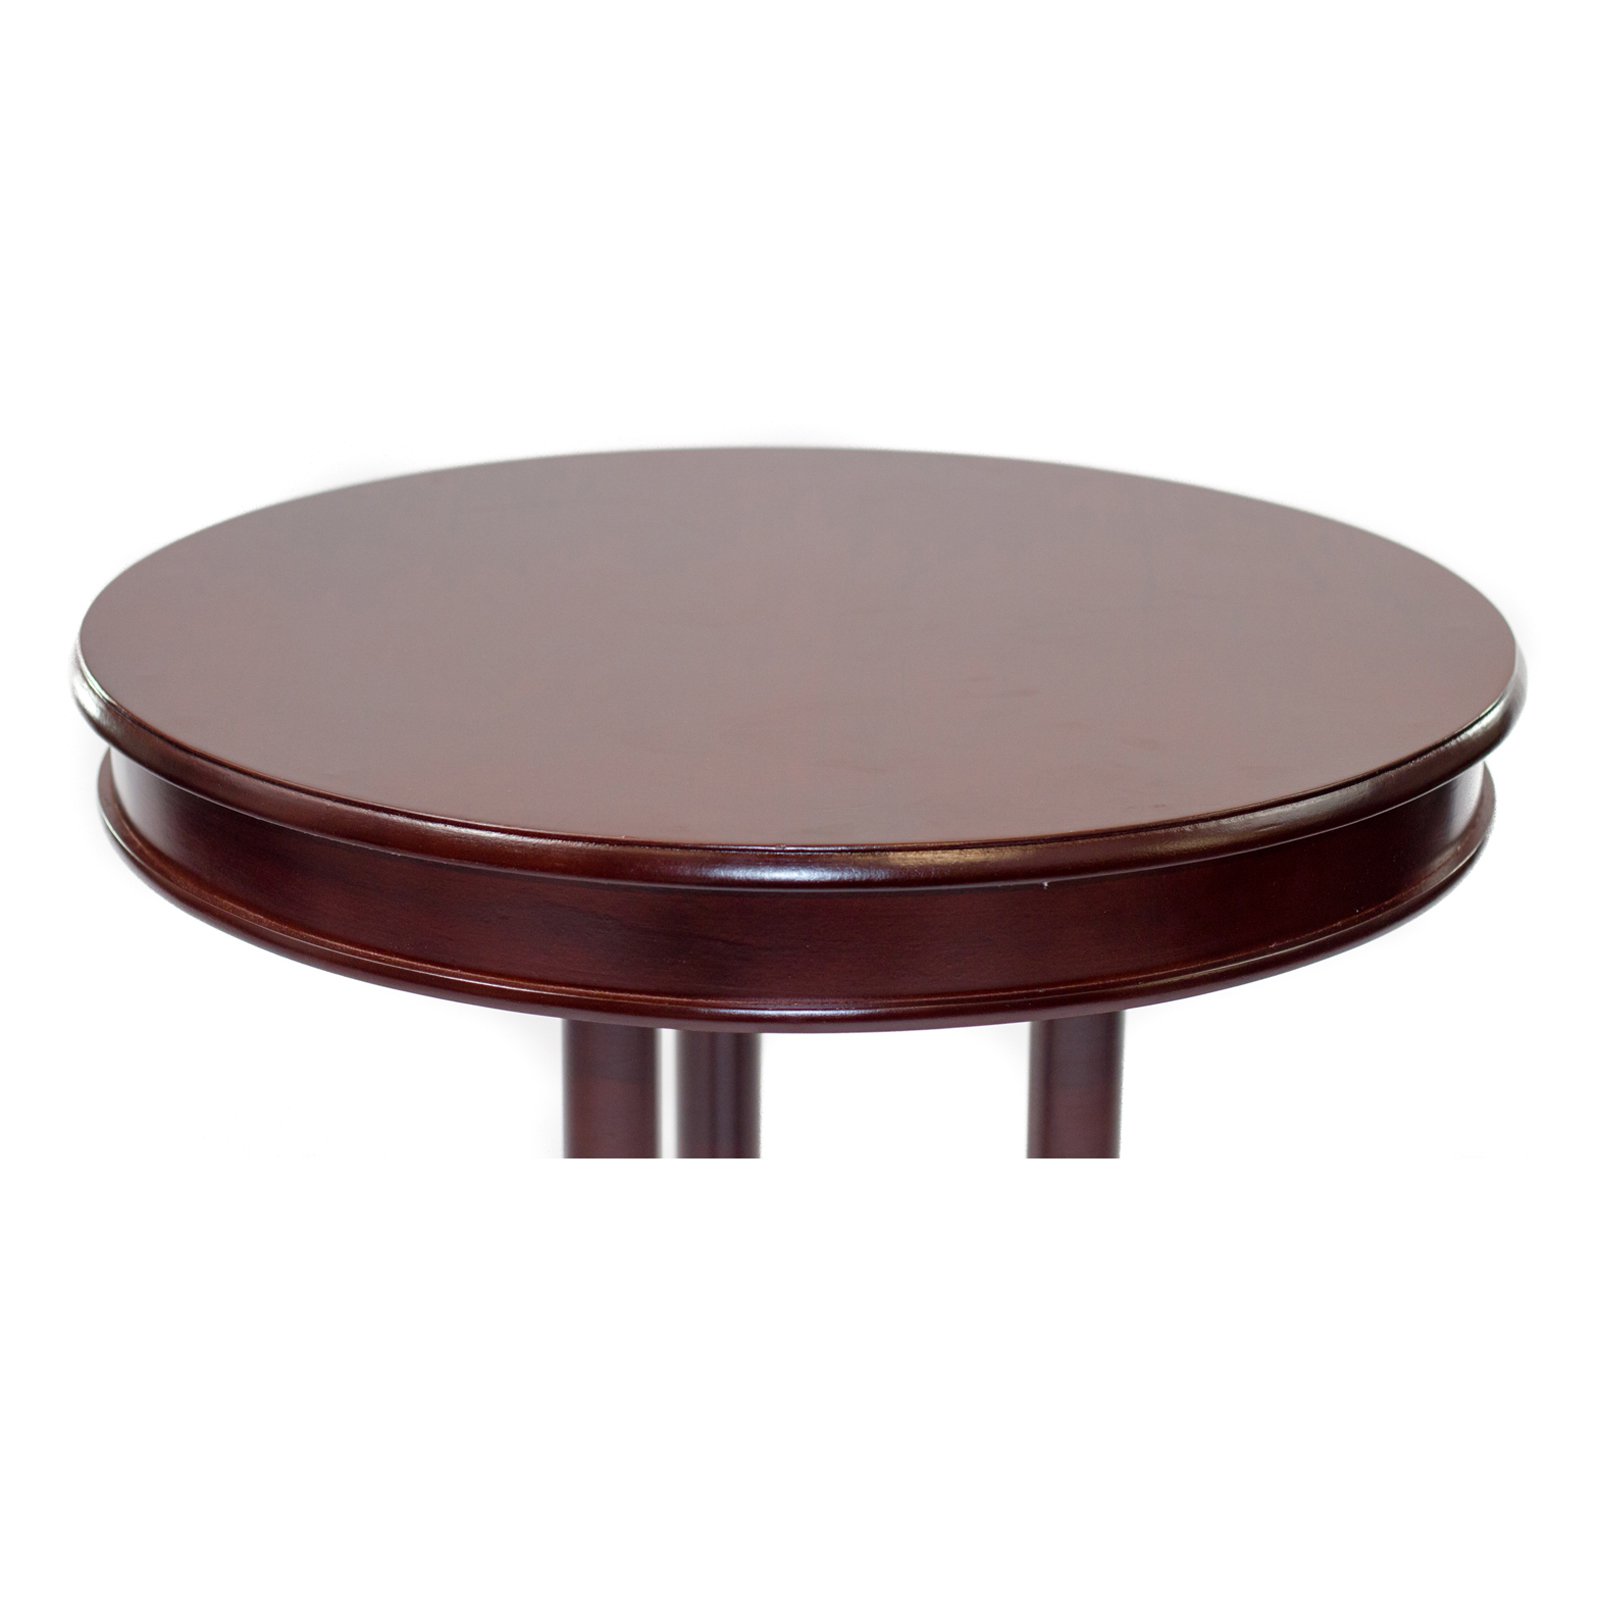 Home Source Industries Circle Accent Table - image 4 of 7